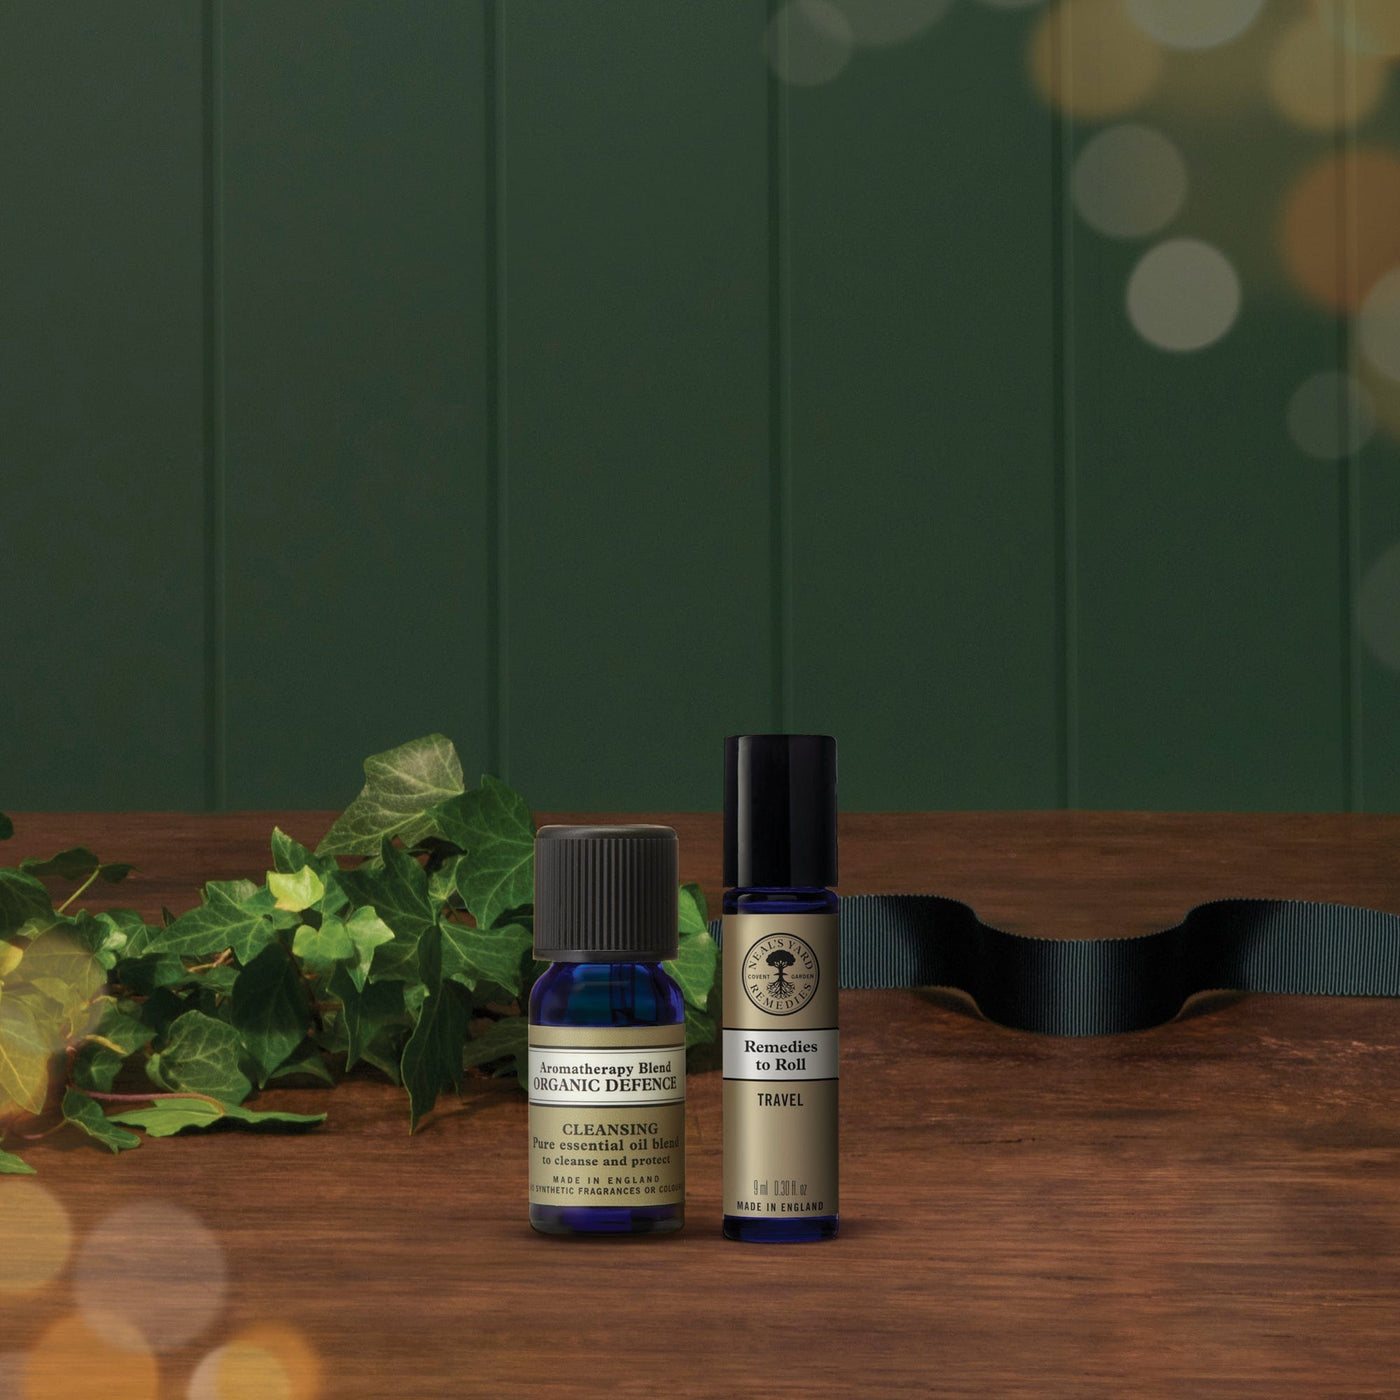 Neal's Yard Remedies Aromatherapy Everyday Essentials Aromatherapy Duo